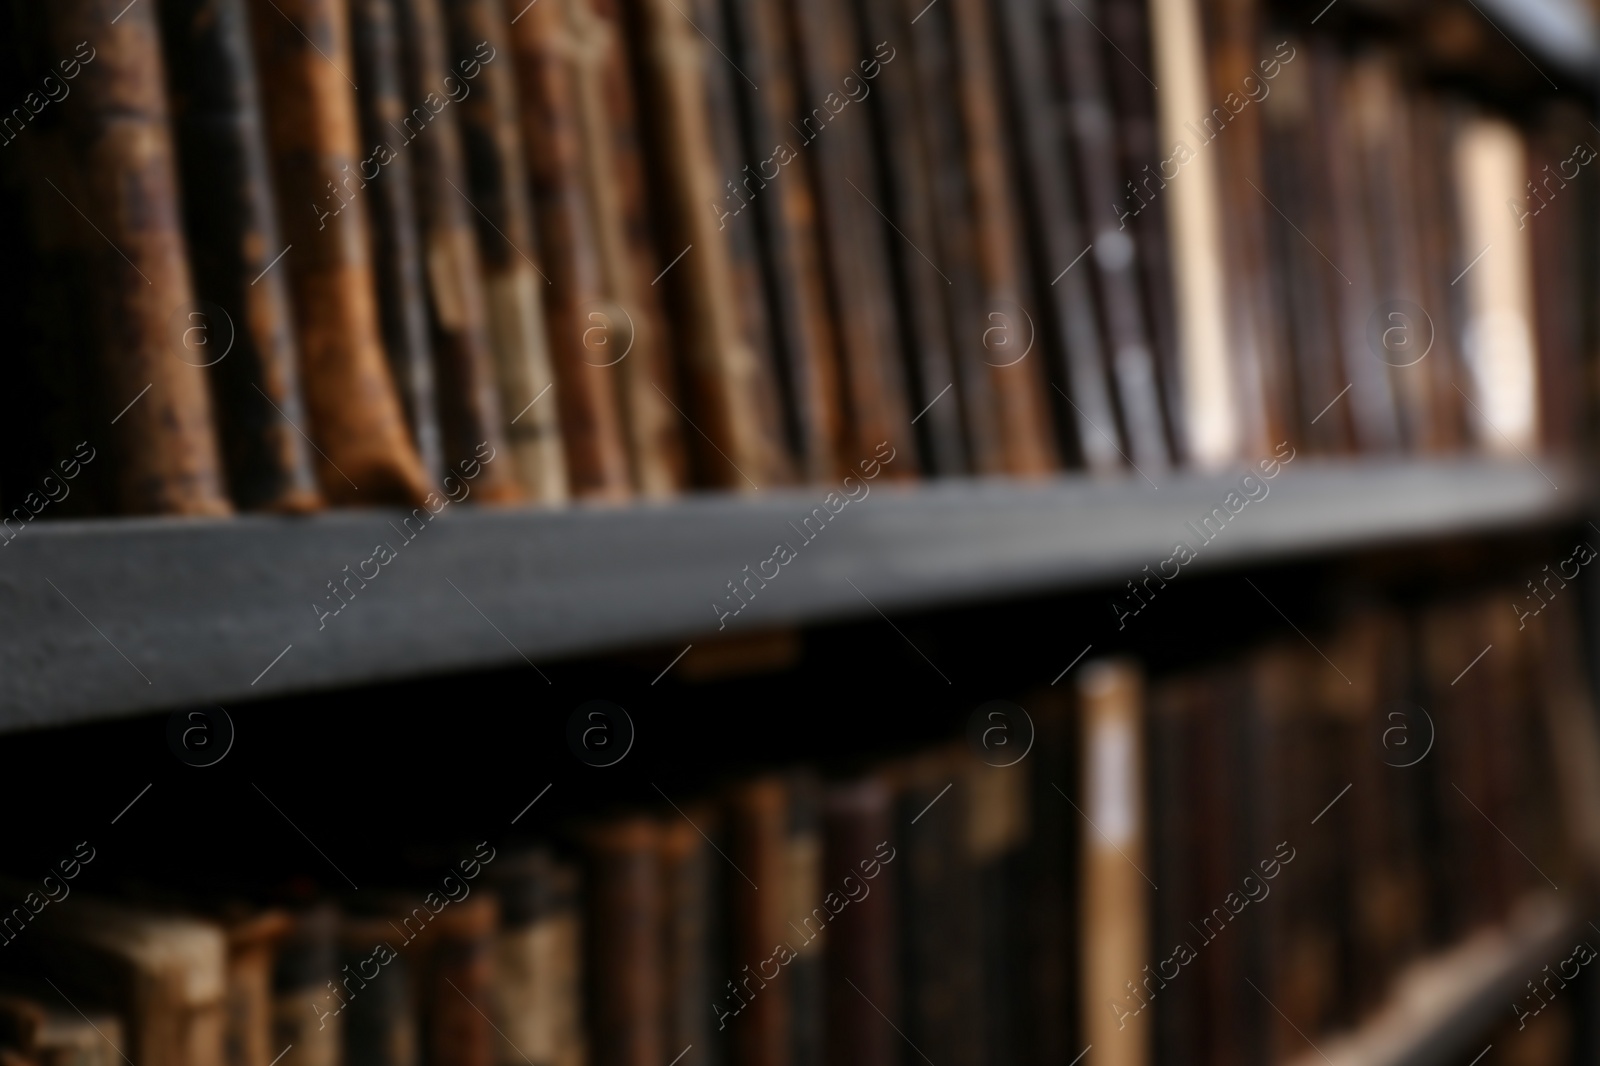 Photo of Blurred view of different books on shelves in library